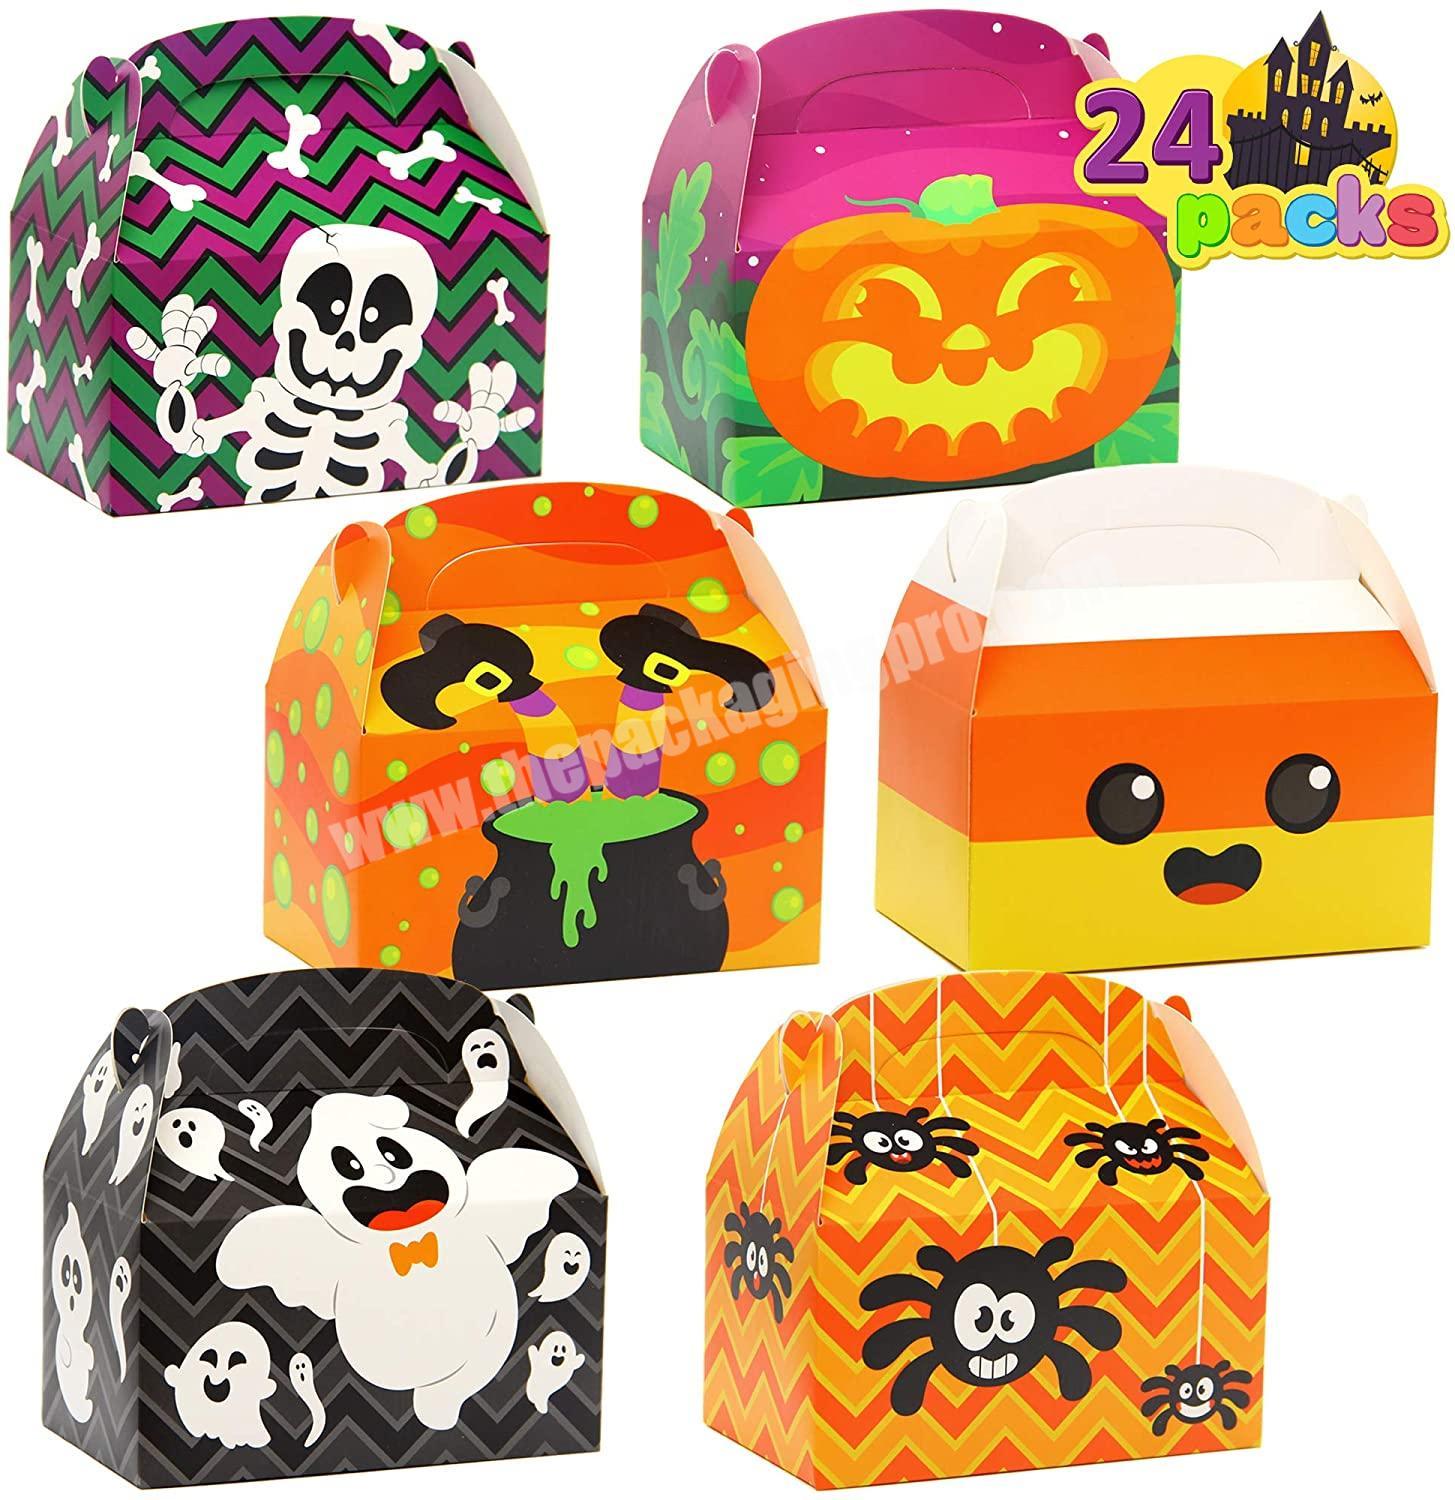 3D Halloween House Cardboard Candy Gift Paper Boxes For Trick-Or-Treating Holiday Pastries Cupcakes Cookies Brownies Donuts